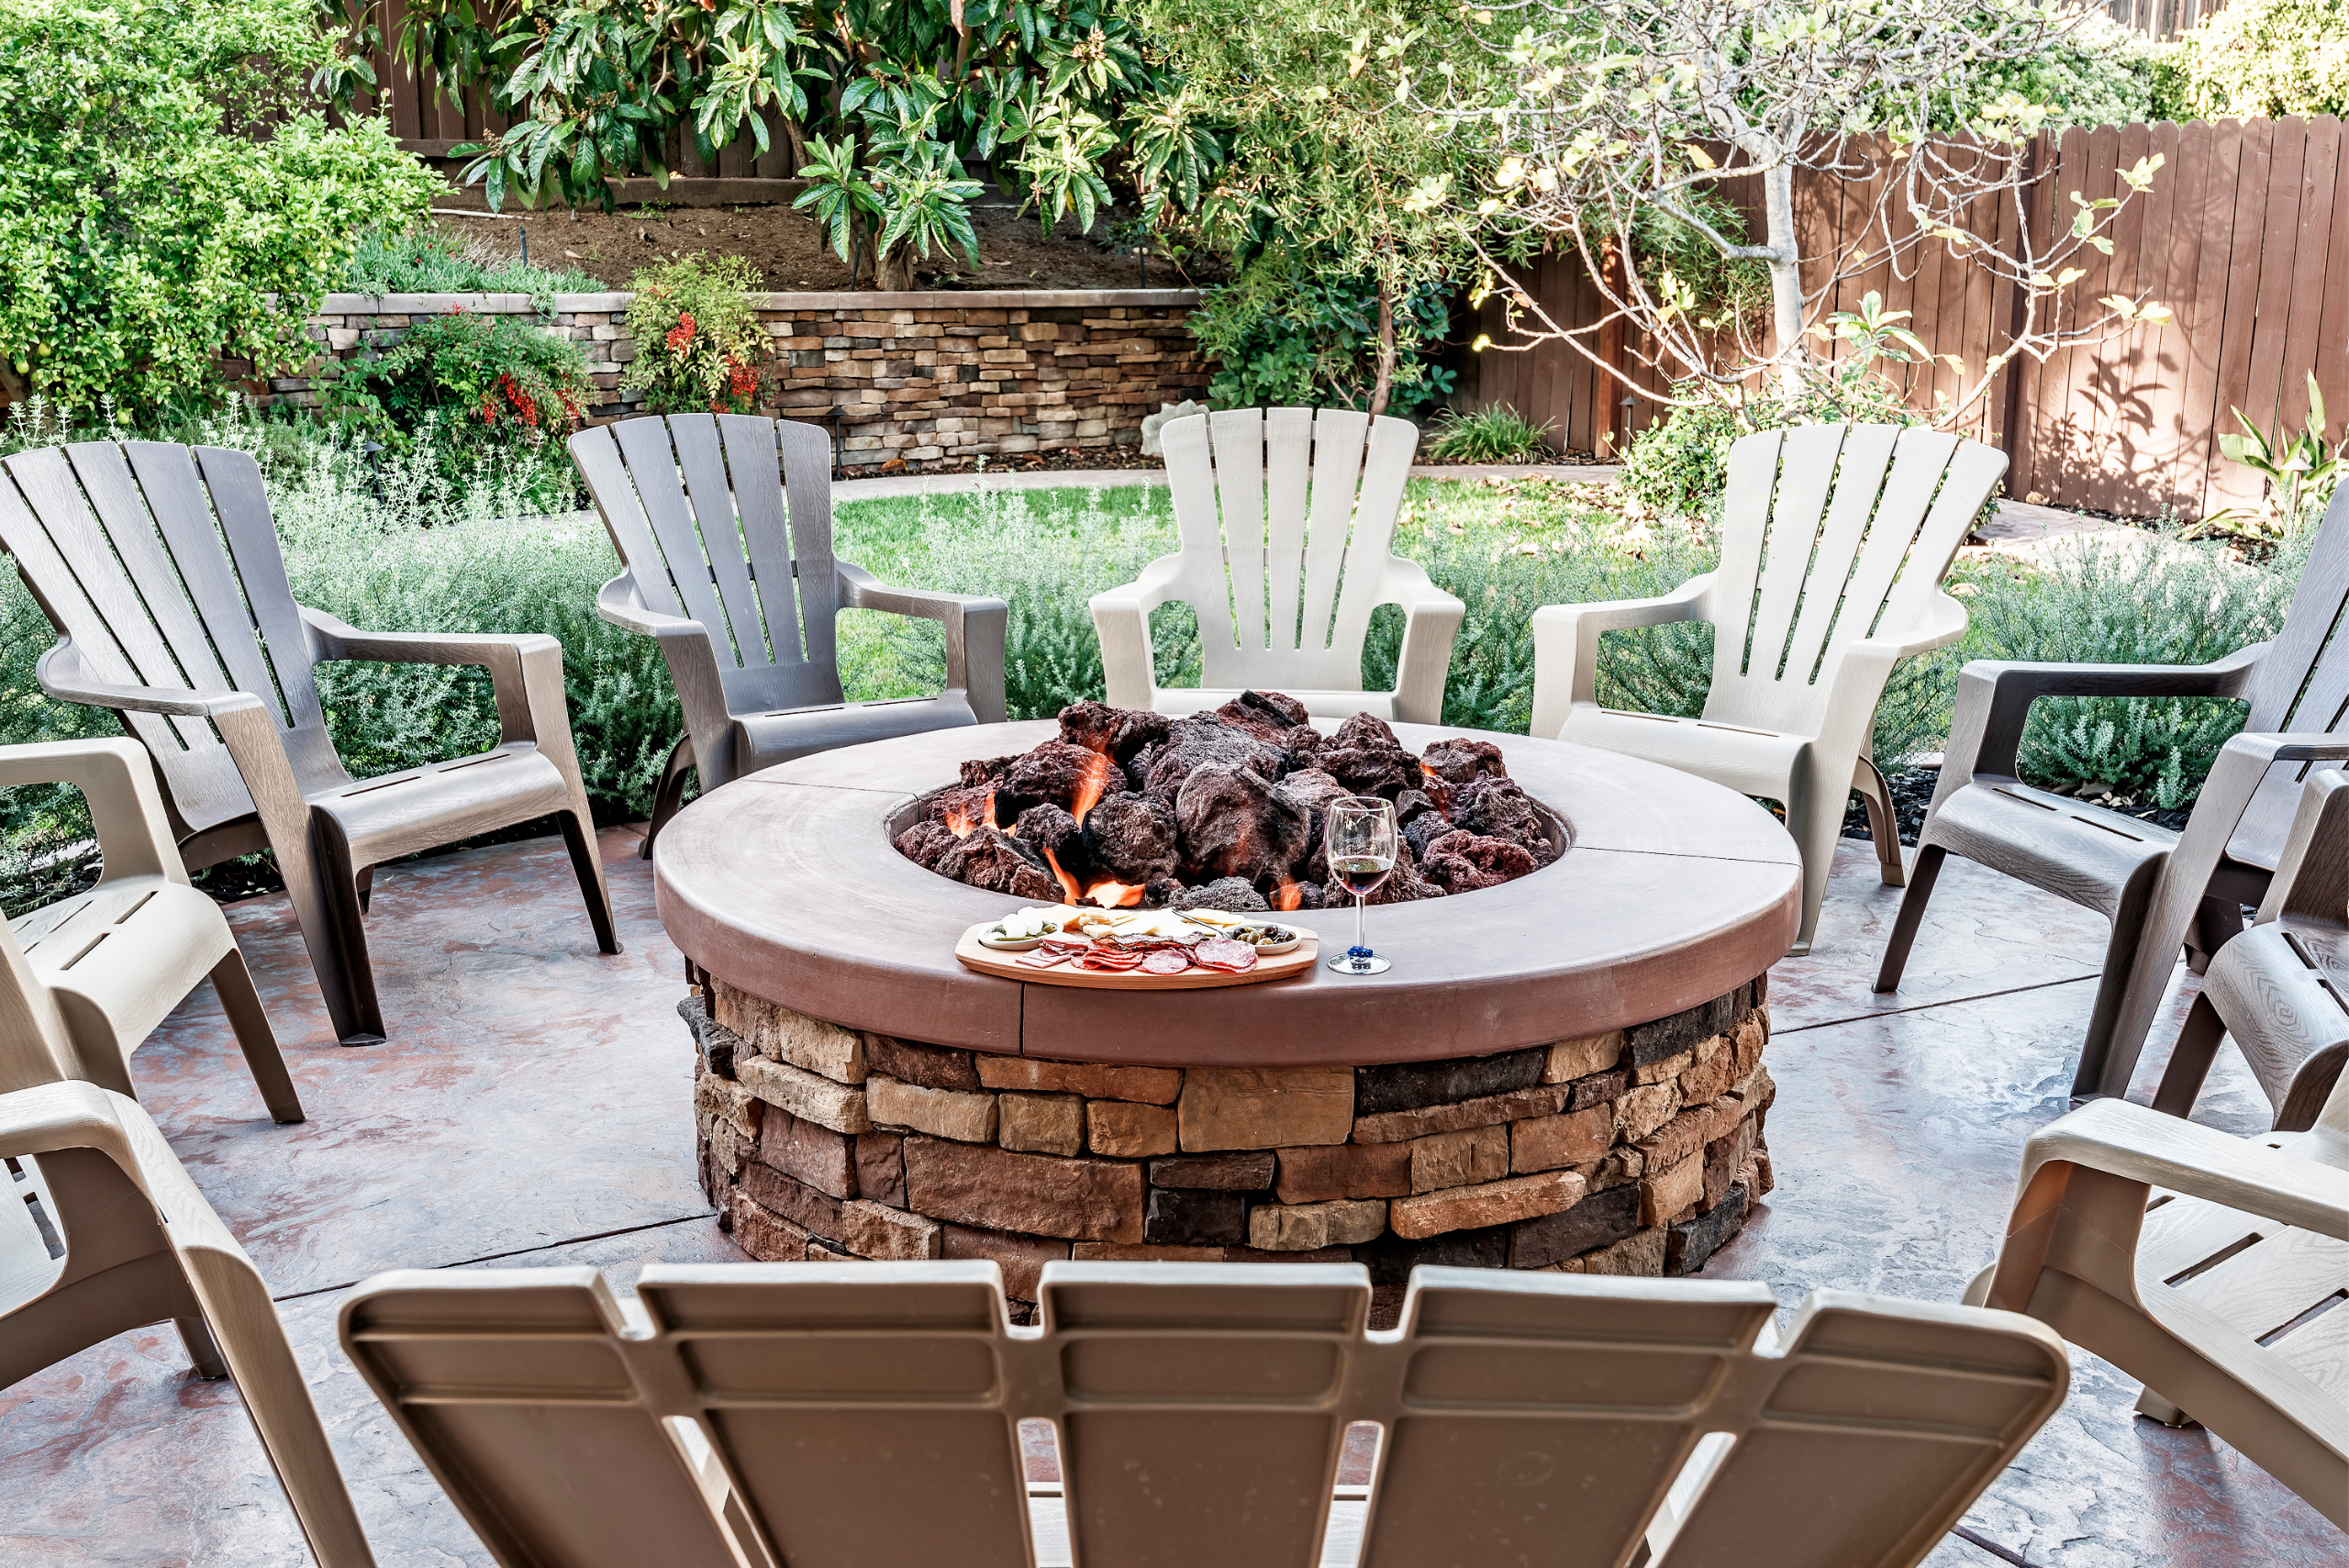 Backyard patio with chairs around a round firepit.